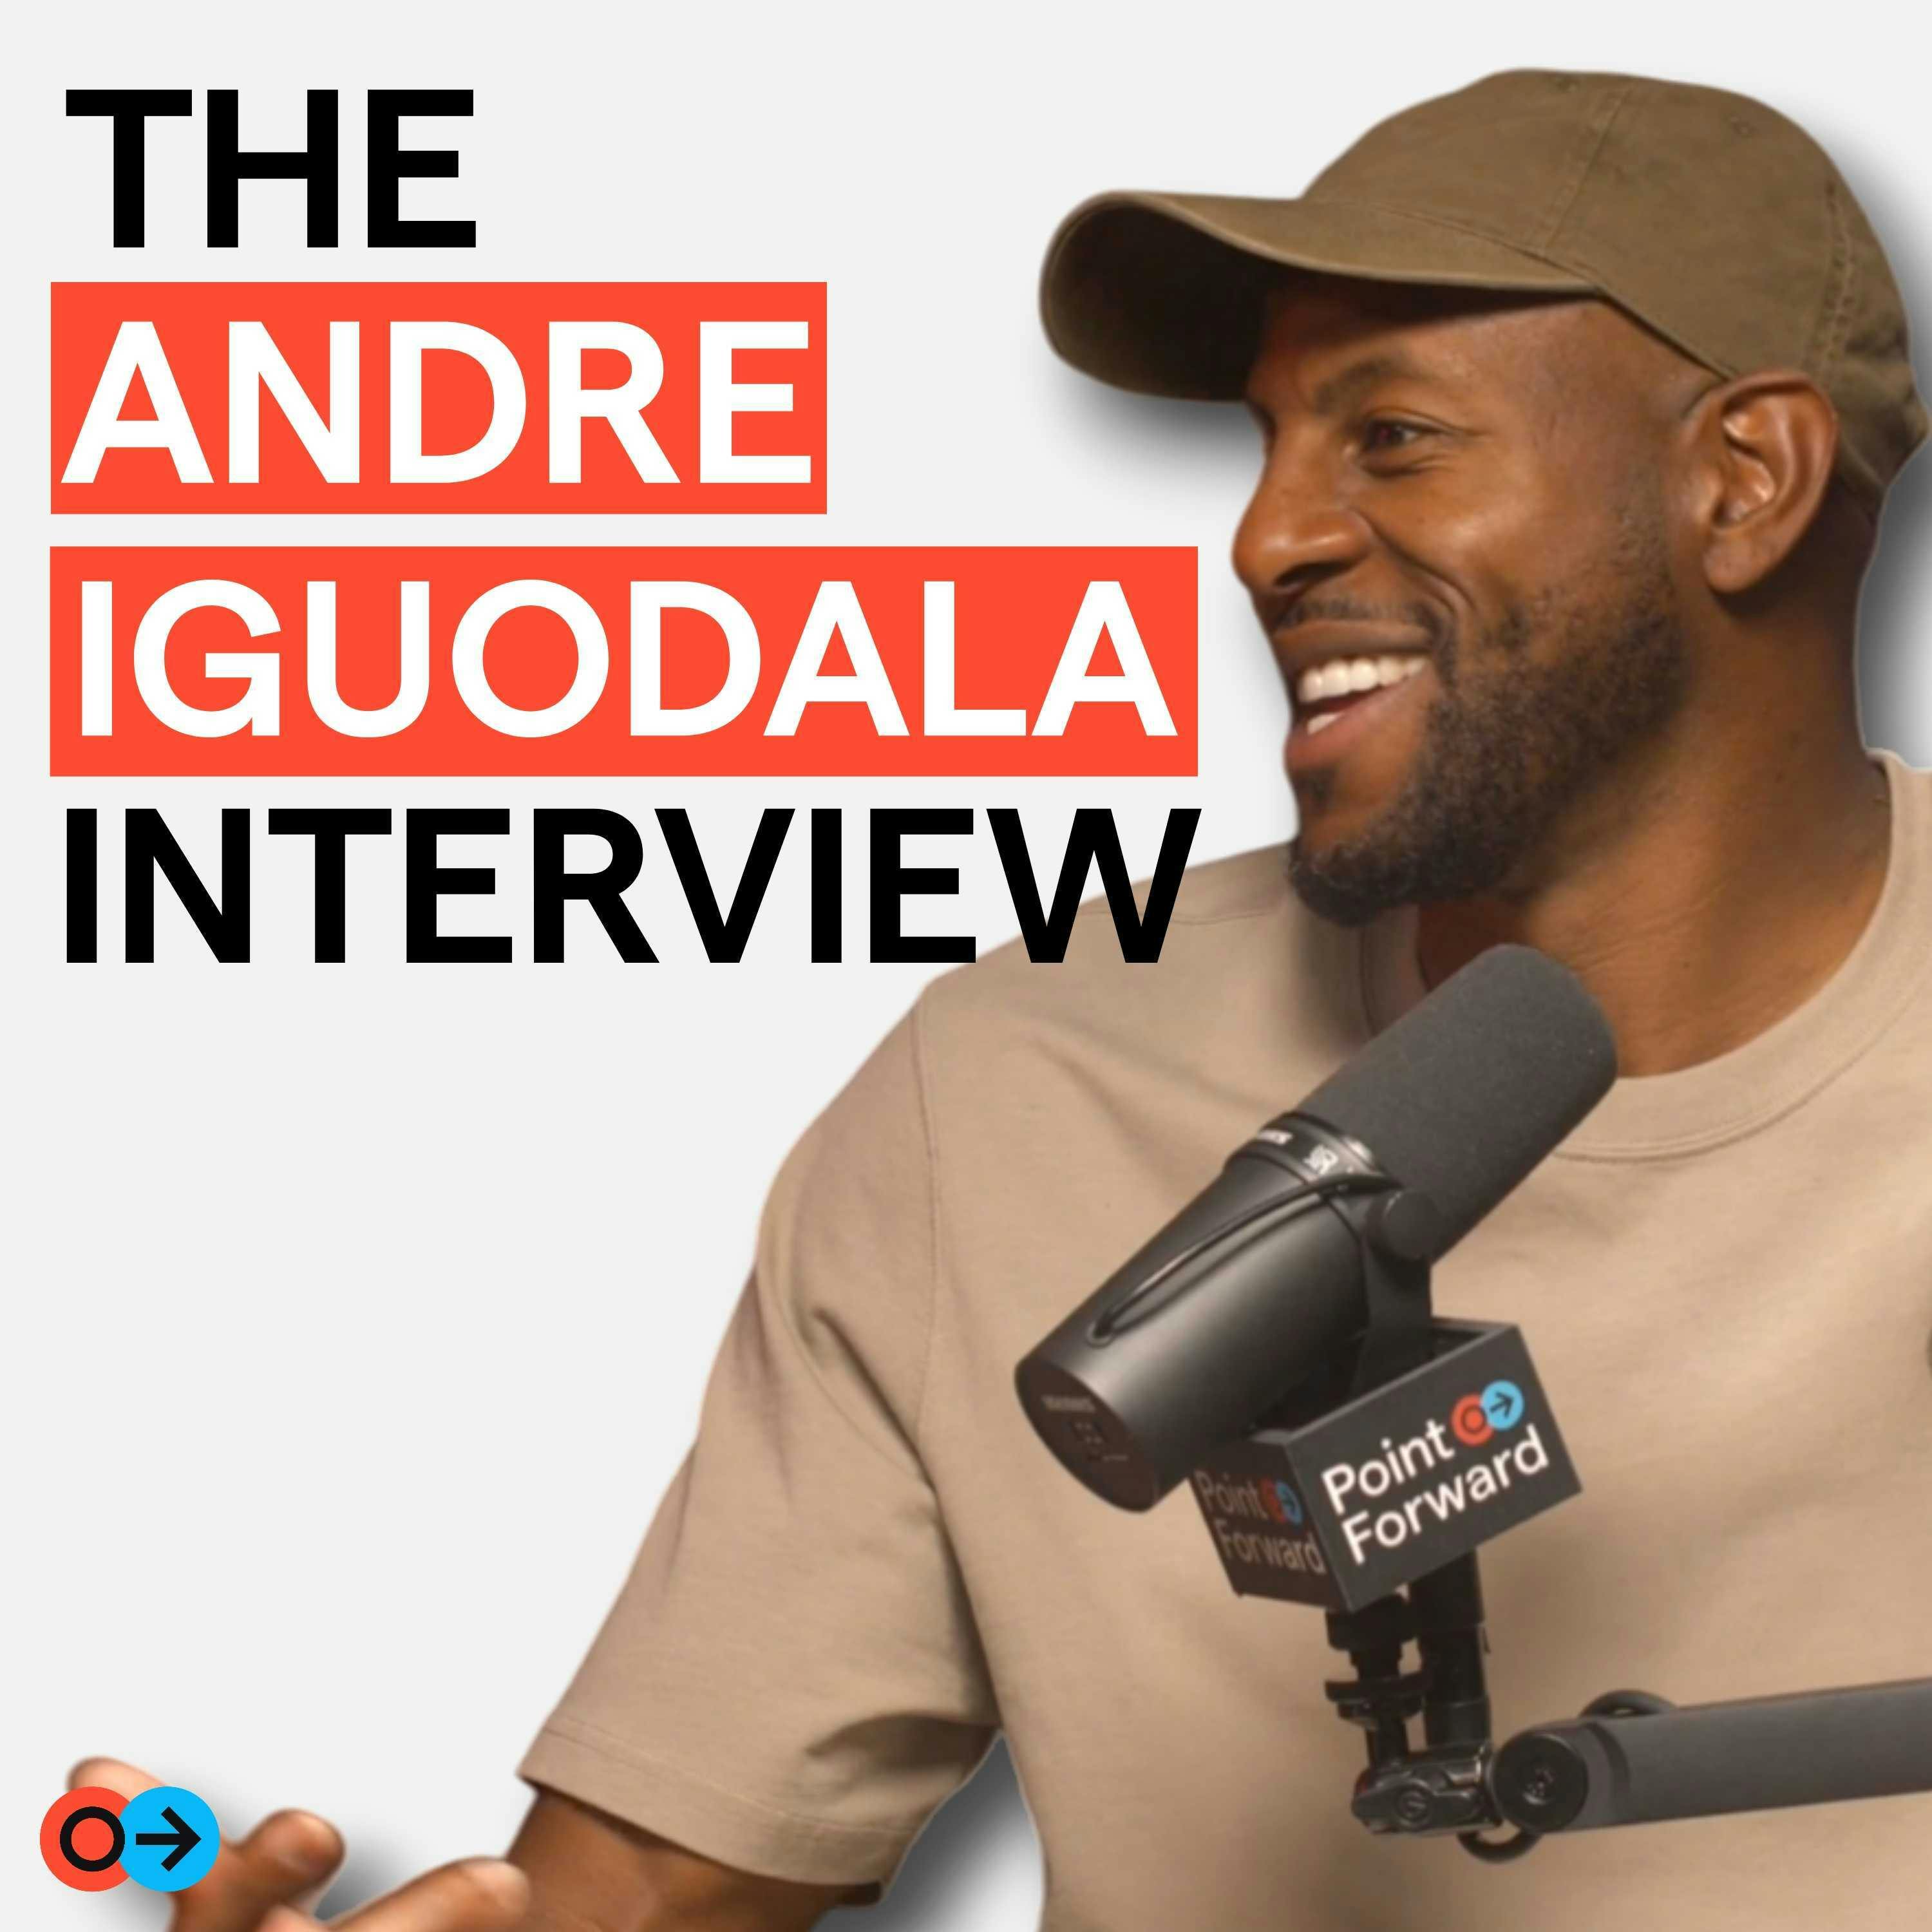 Holla, Iguodala: Andre Announces Retirement & Reflects on His Career